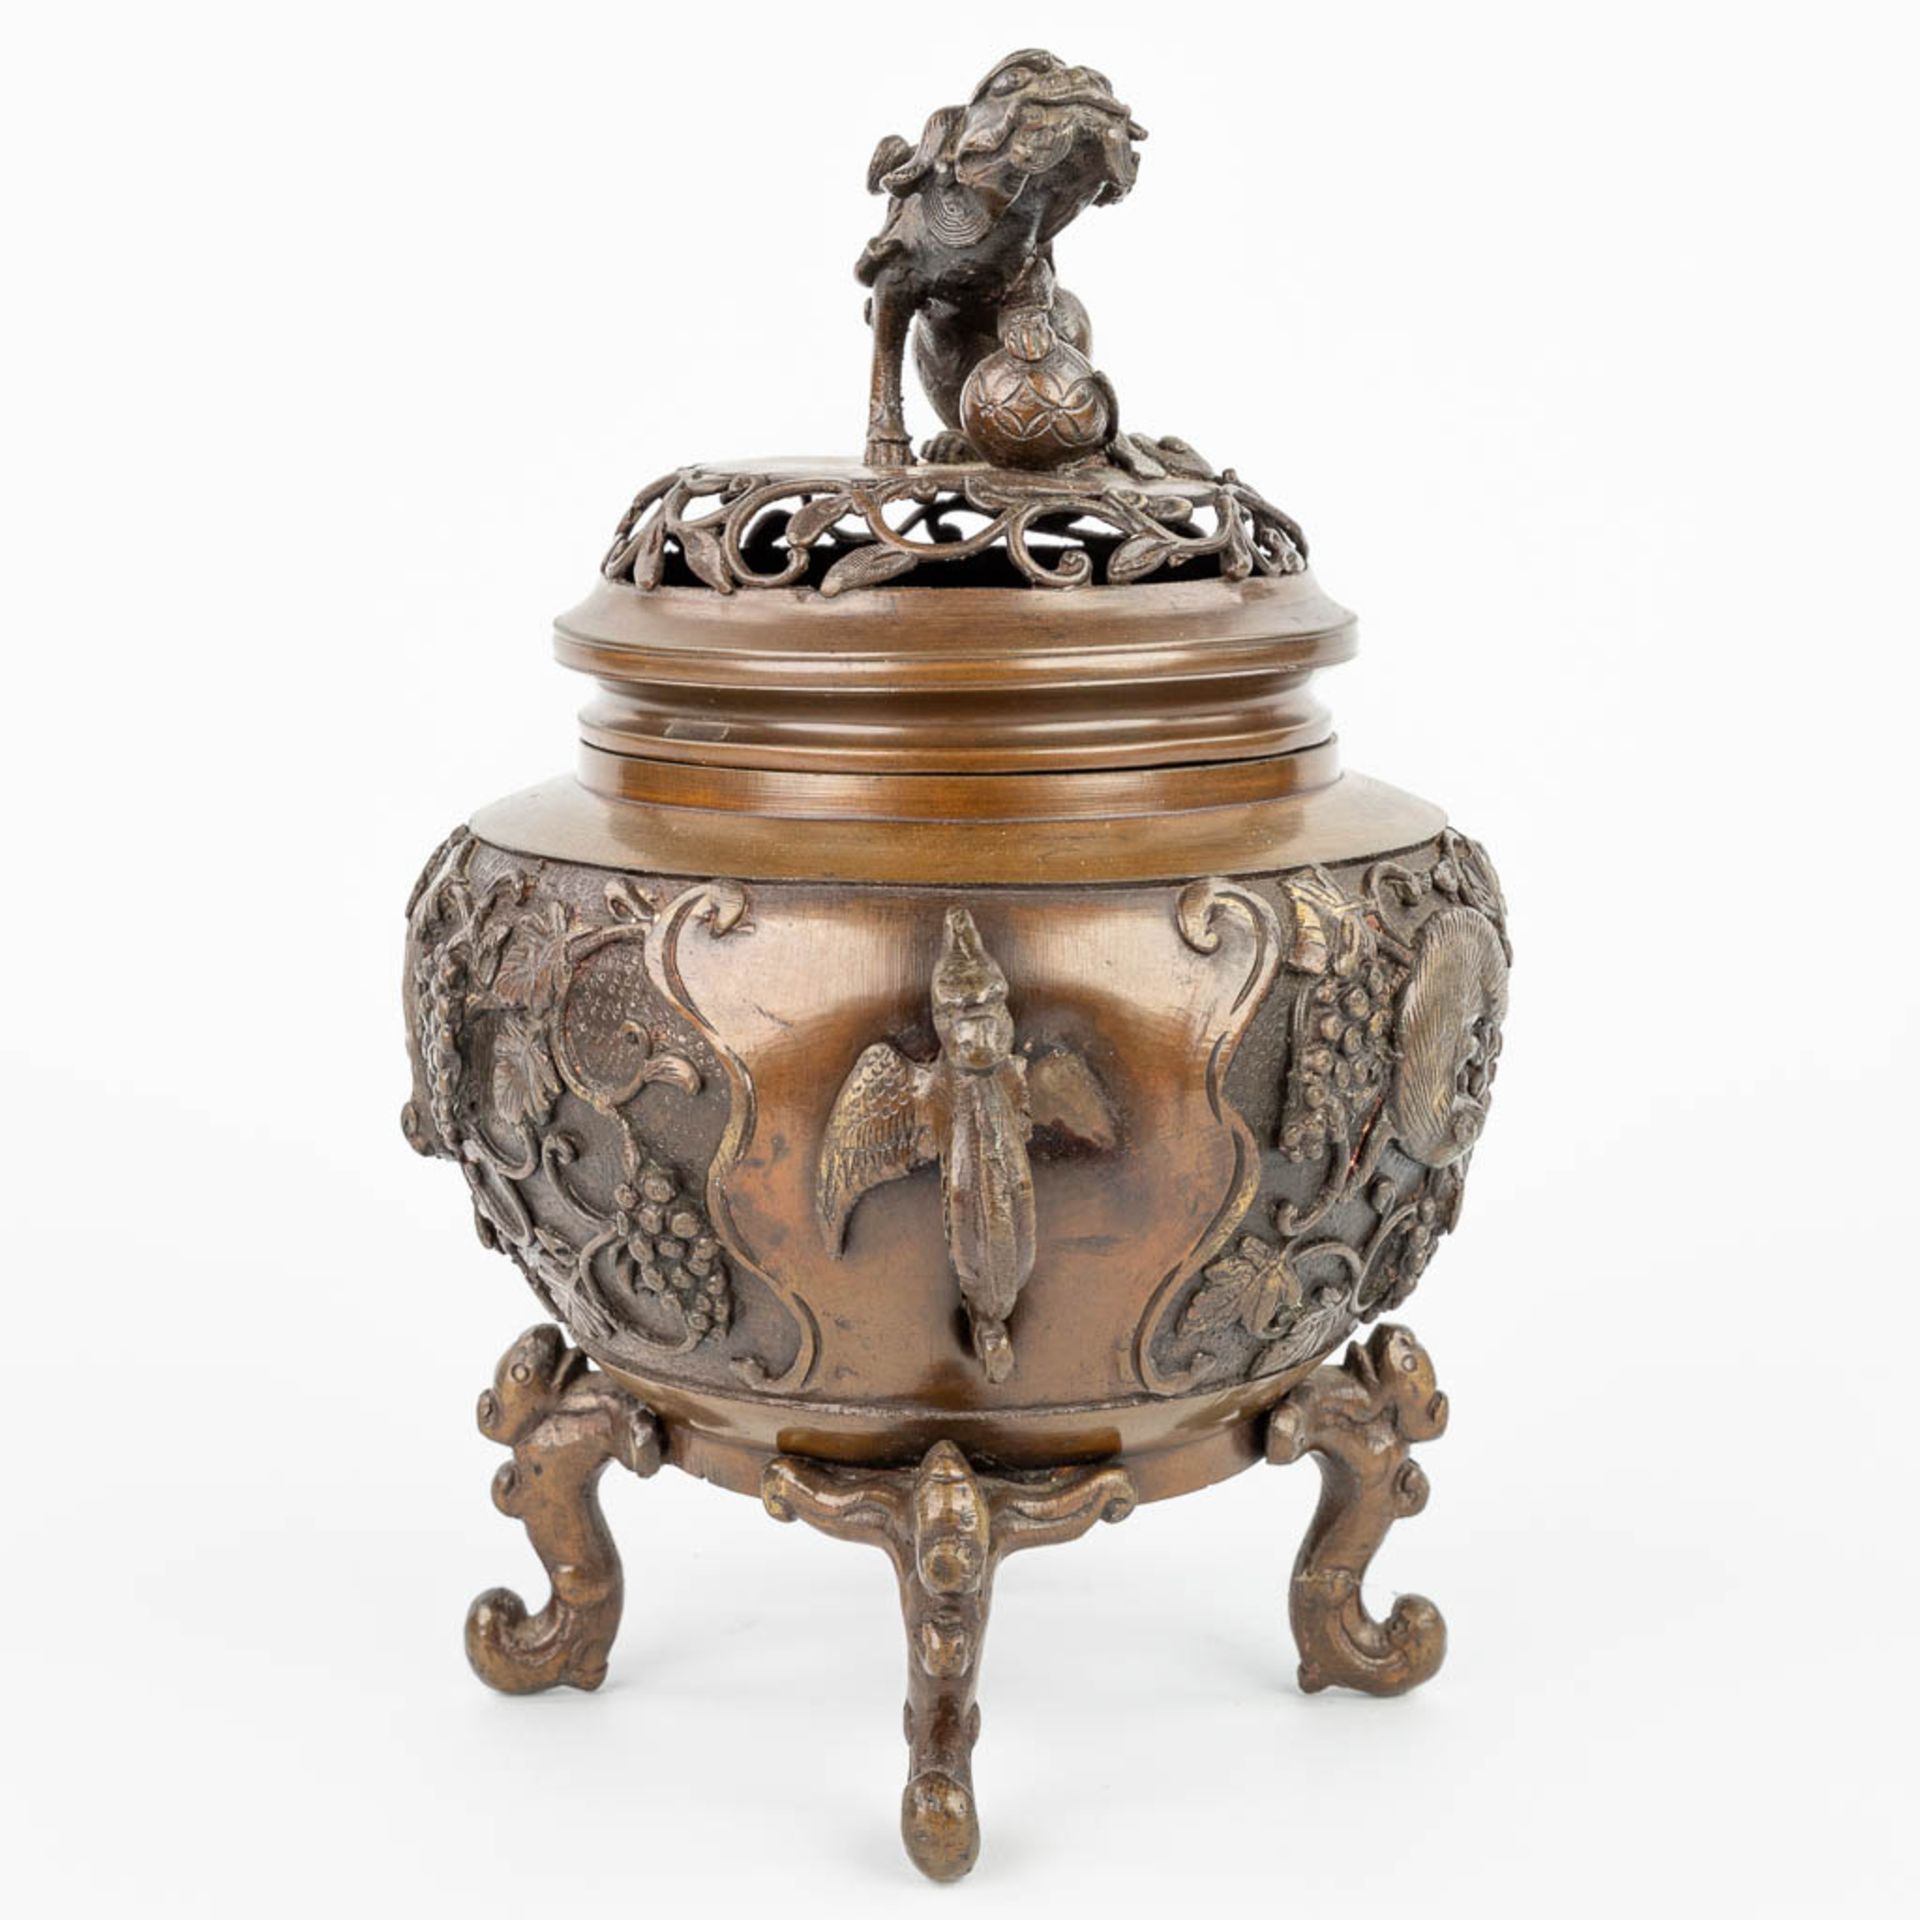 An Oriental Brûle Parfum made of patinated bronze and decorated with figurines. (H:28cm) - Image 15 of 16